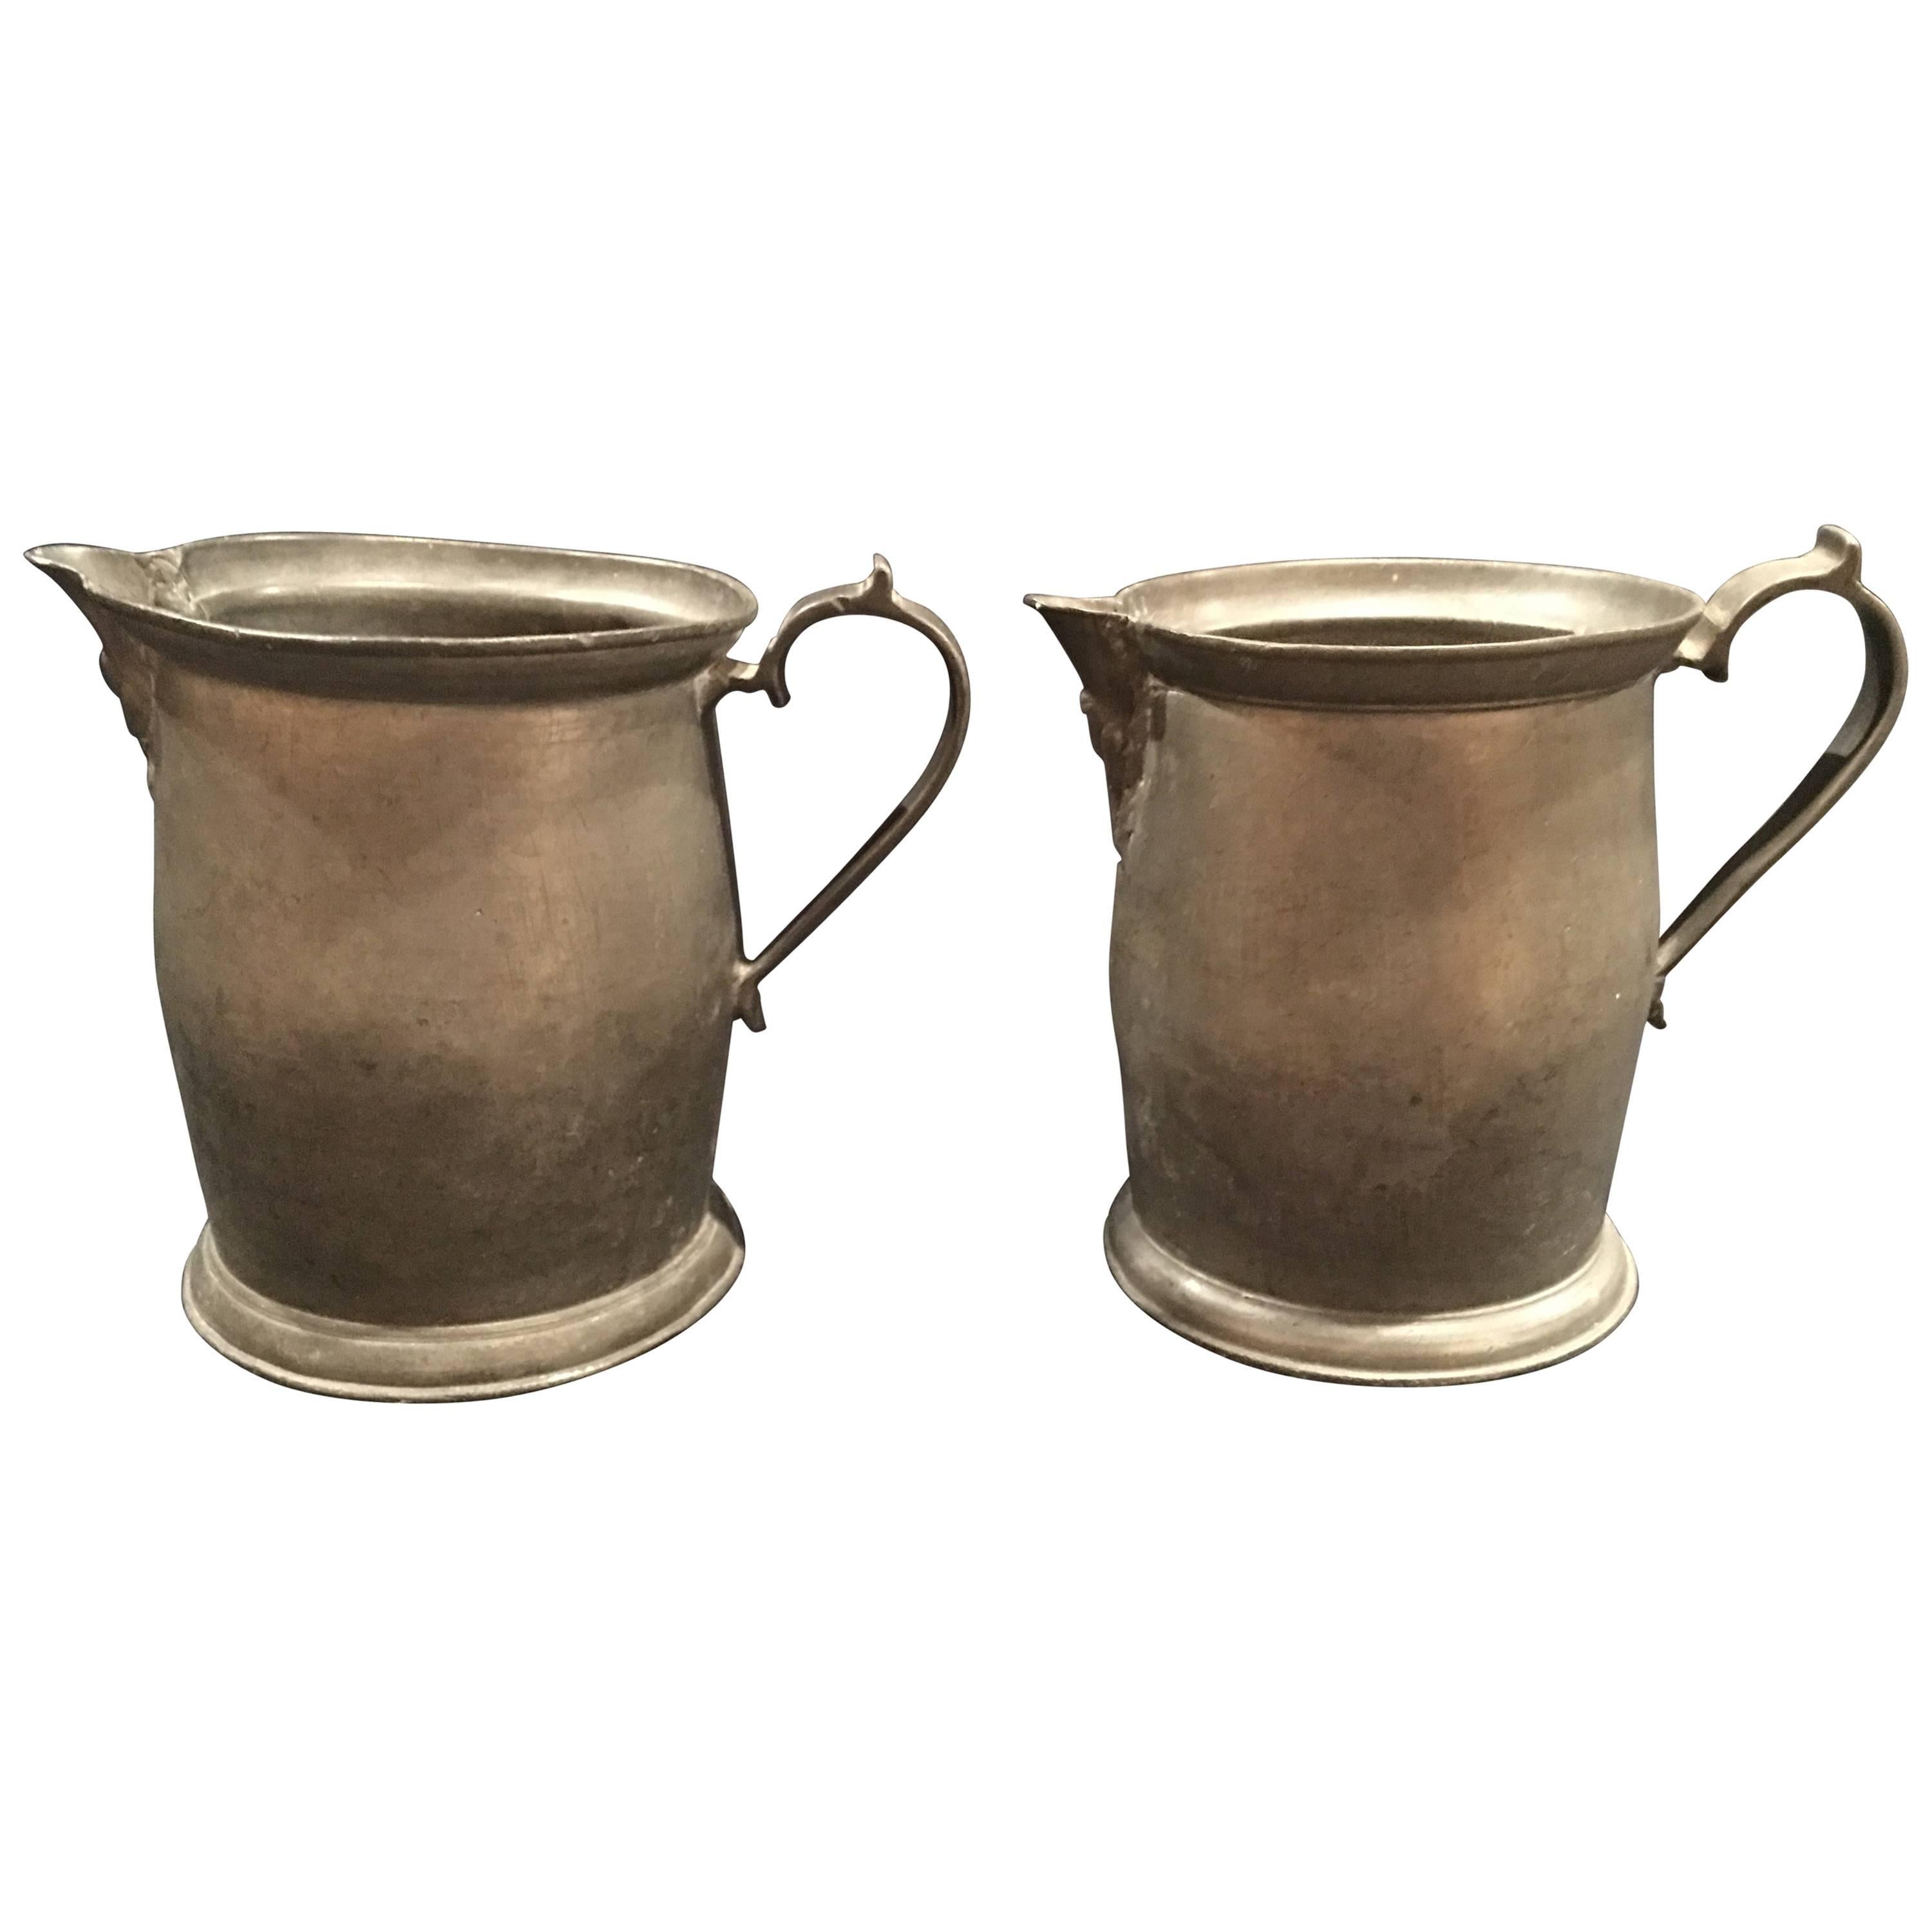 English Pair of Pewter Mugs or Cups with Handles, 19th Century